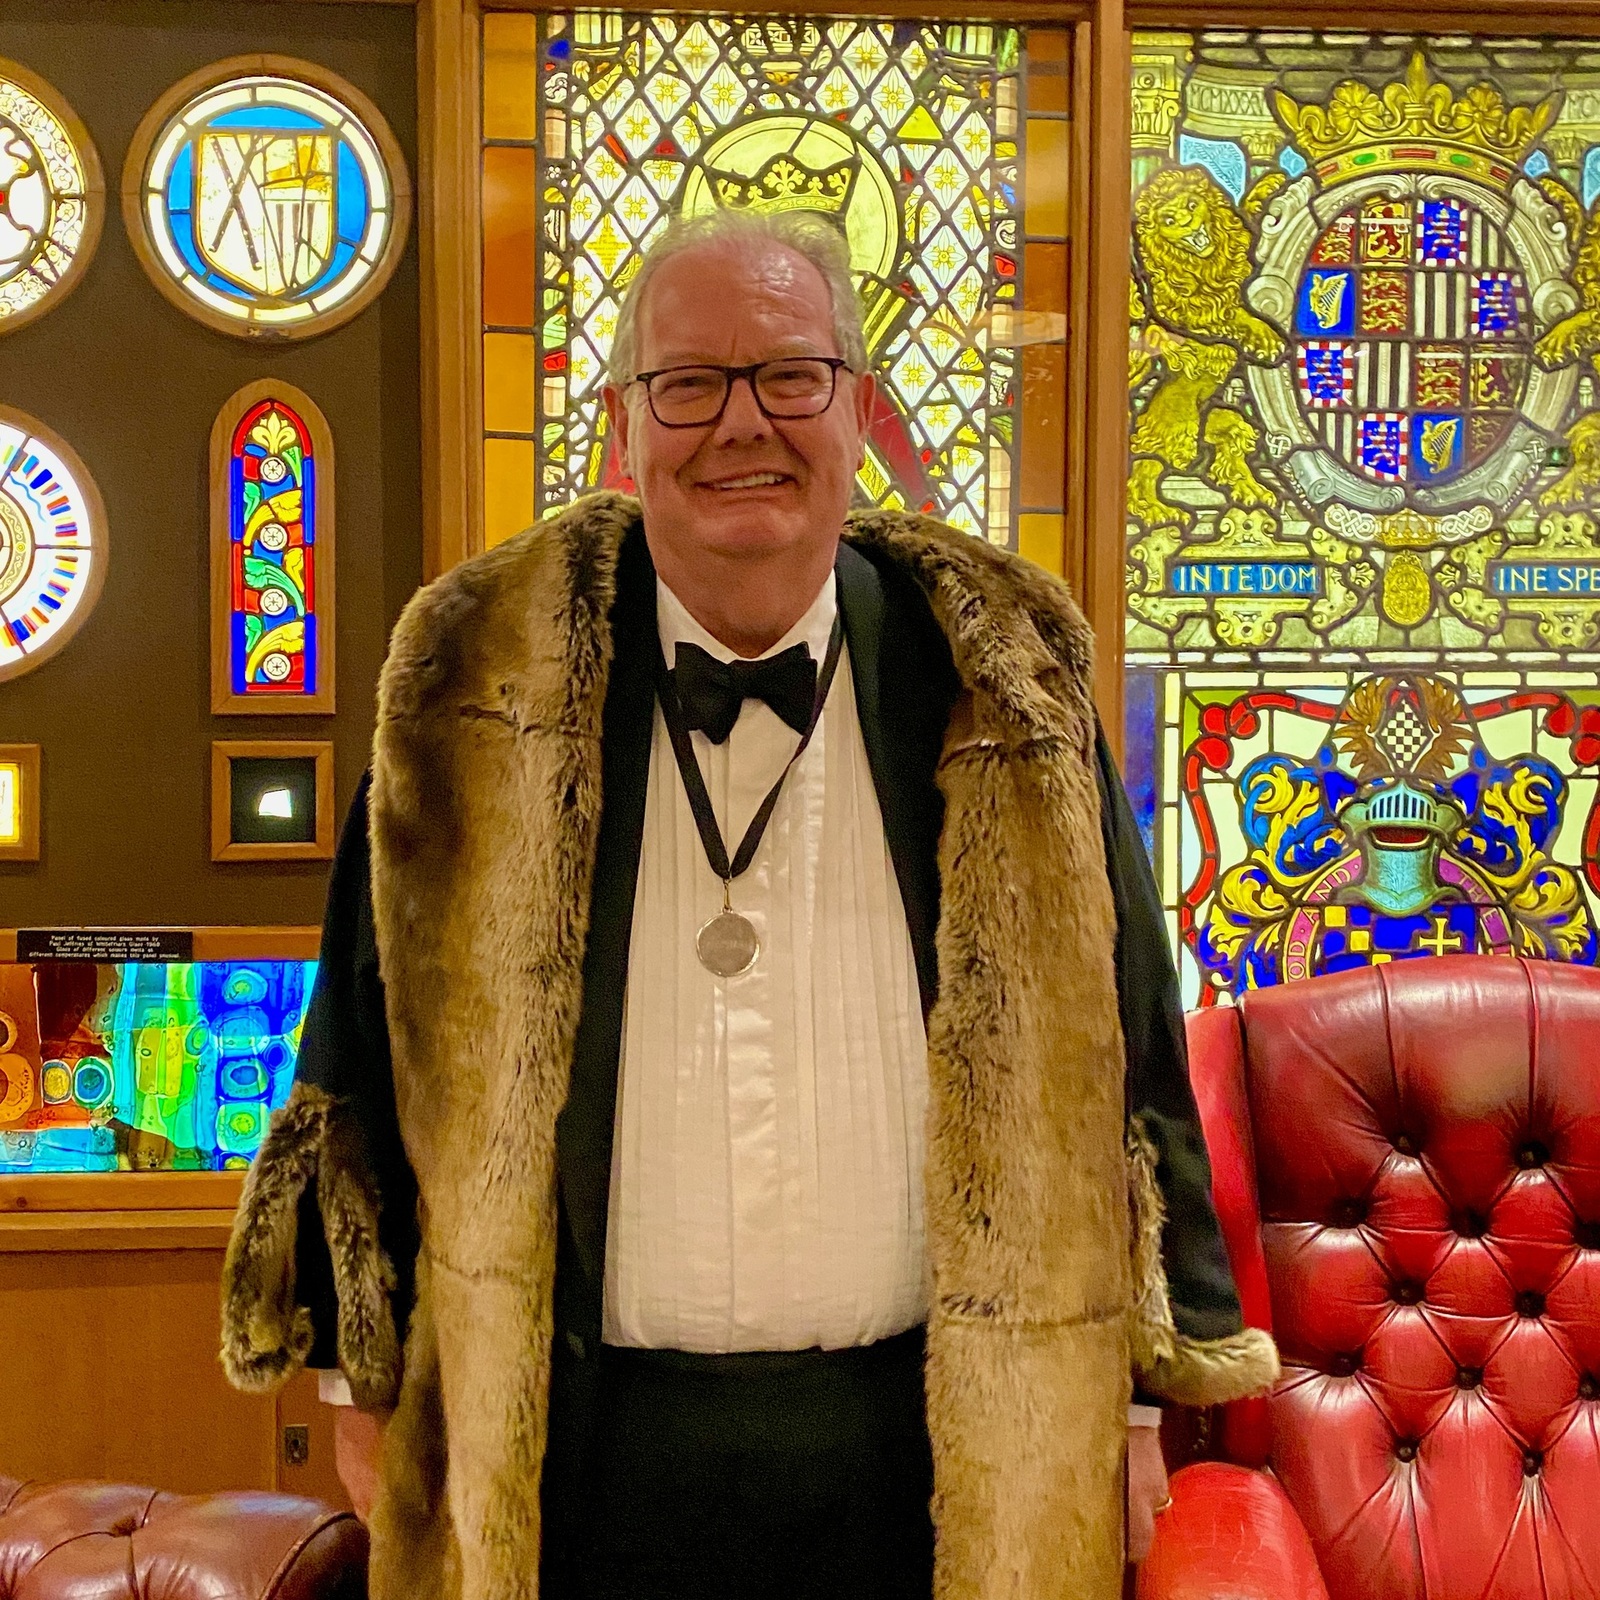 Following my virtual admission some two years ago, delighted to be the first person to be physically clothed in the Livery of the Glaziers in a subsequent and newly adapted ceremony